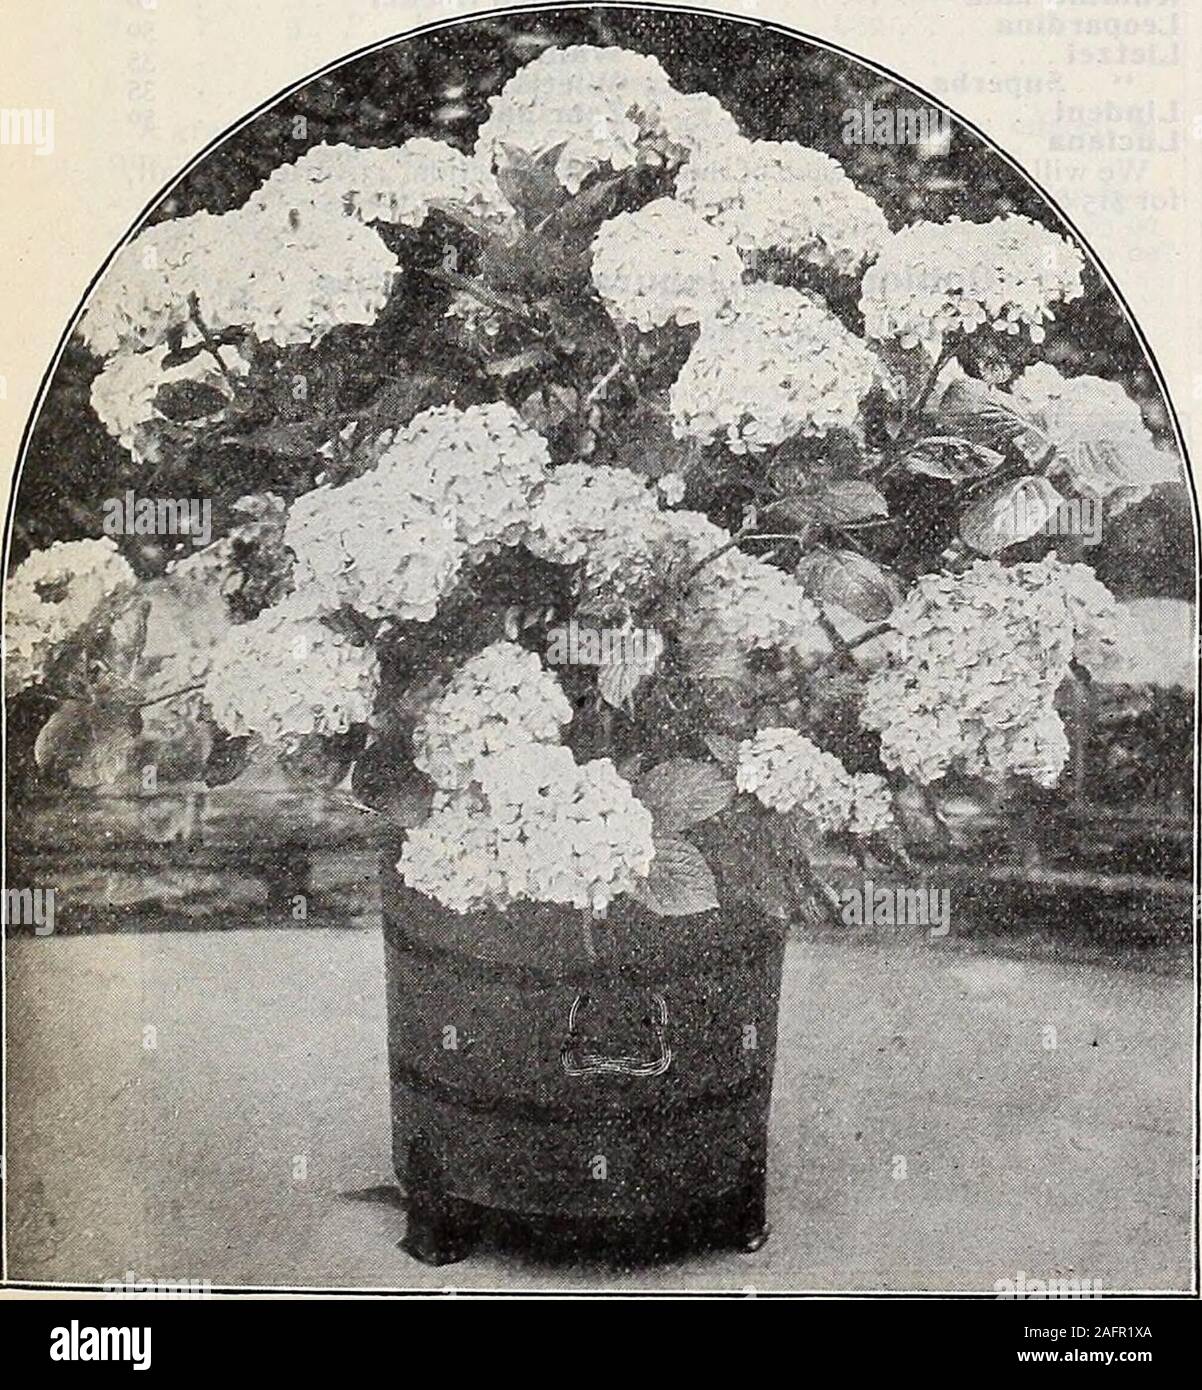 . Dreer's wholesale price list : seeds for florists plants for florists bulbs for florists vegetable seeds, fungicides, fertilizers, insecticides implements, sundries, etc. per rose-magenta with white base. Mrs. E. Q. Hill. Beautiful salmon ; a fine large flower. Nuit Poitevine. A beautiful rose-purple, lower petalsfeathered rich scarlet; fine habit. Paul Crampbell. A brilliant scarlet bedder. Pamela. Large, white centre, shading to rosy-lake, and bold outermargin of violet-crimson. Snowdrop. The finest white, single bedder. Sycamore. A particularly striking, bright, clear salmon-pink.Strong 2 Stock Photo